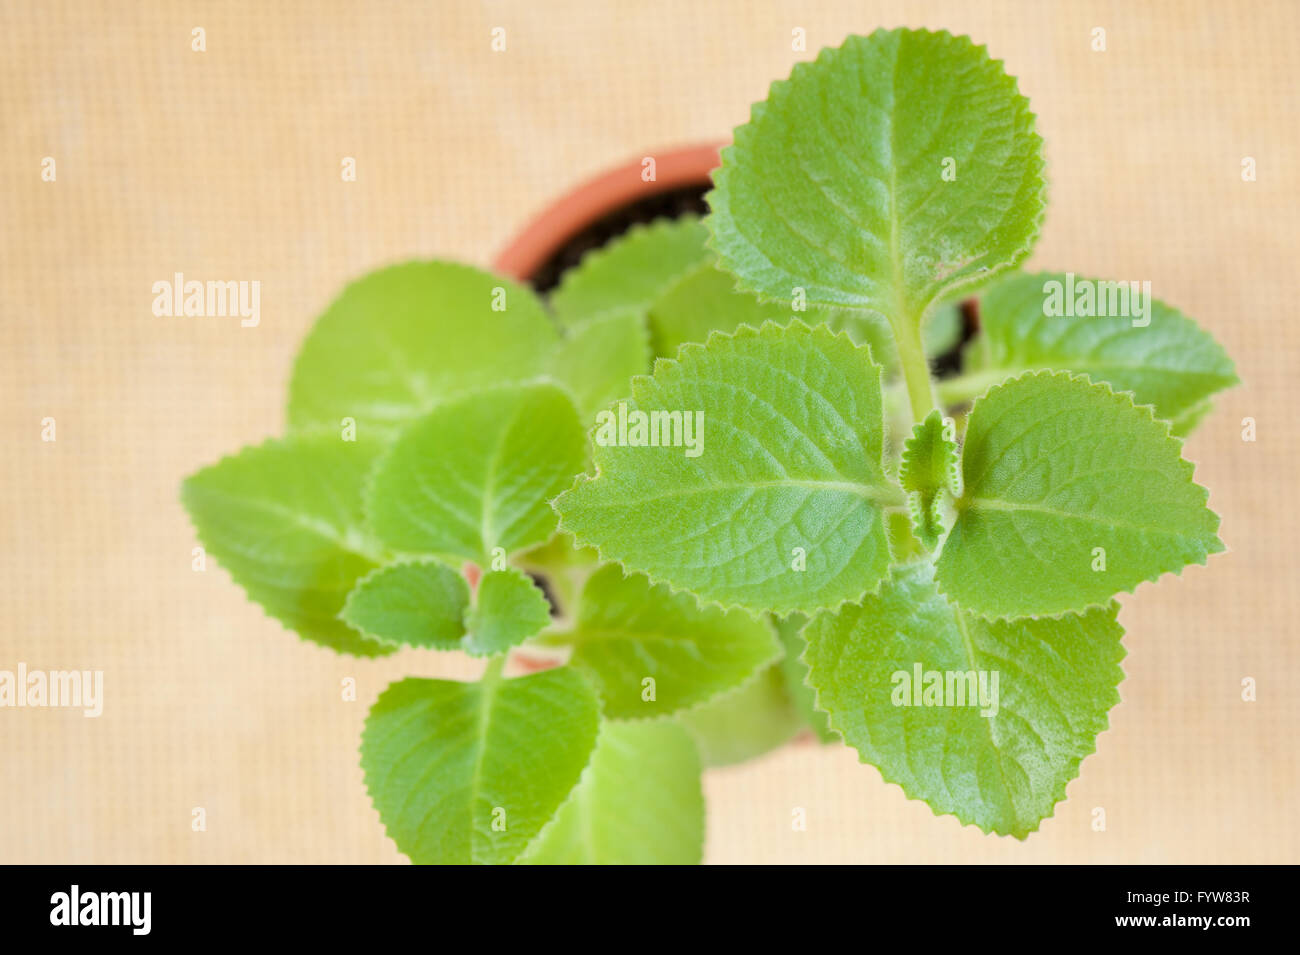 Plectranthus amboinicus plant tops, herb with many names like Mexican Mint, Spanish Thyme, Cuban Oregano, fragrant culinary herb Stock Photo